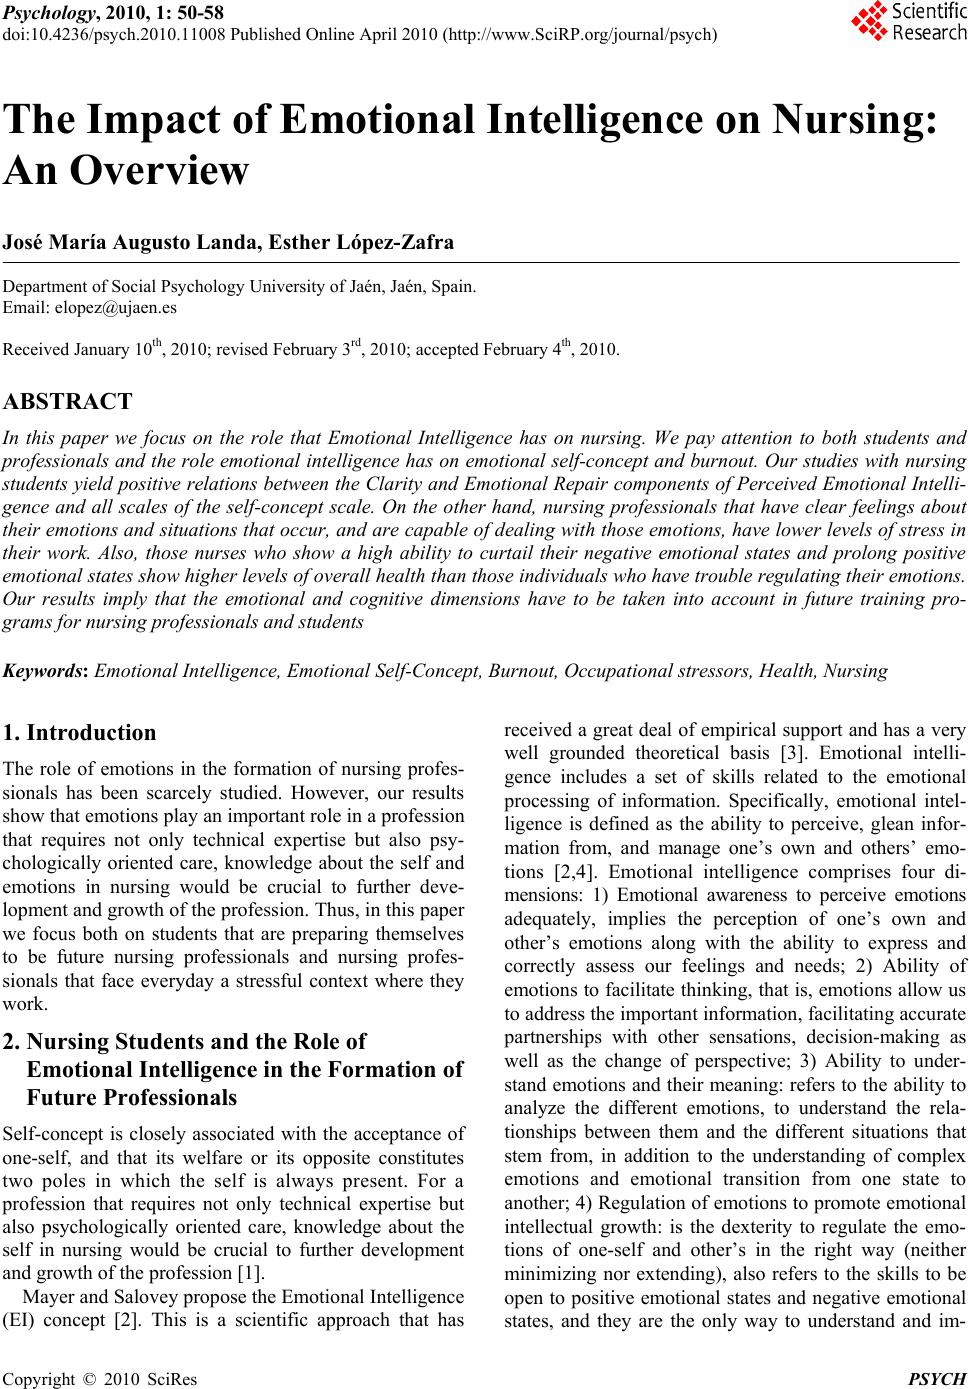 a literature review of emotional intelligence and nursing education